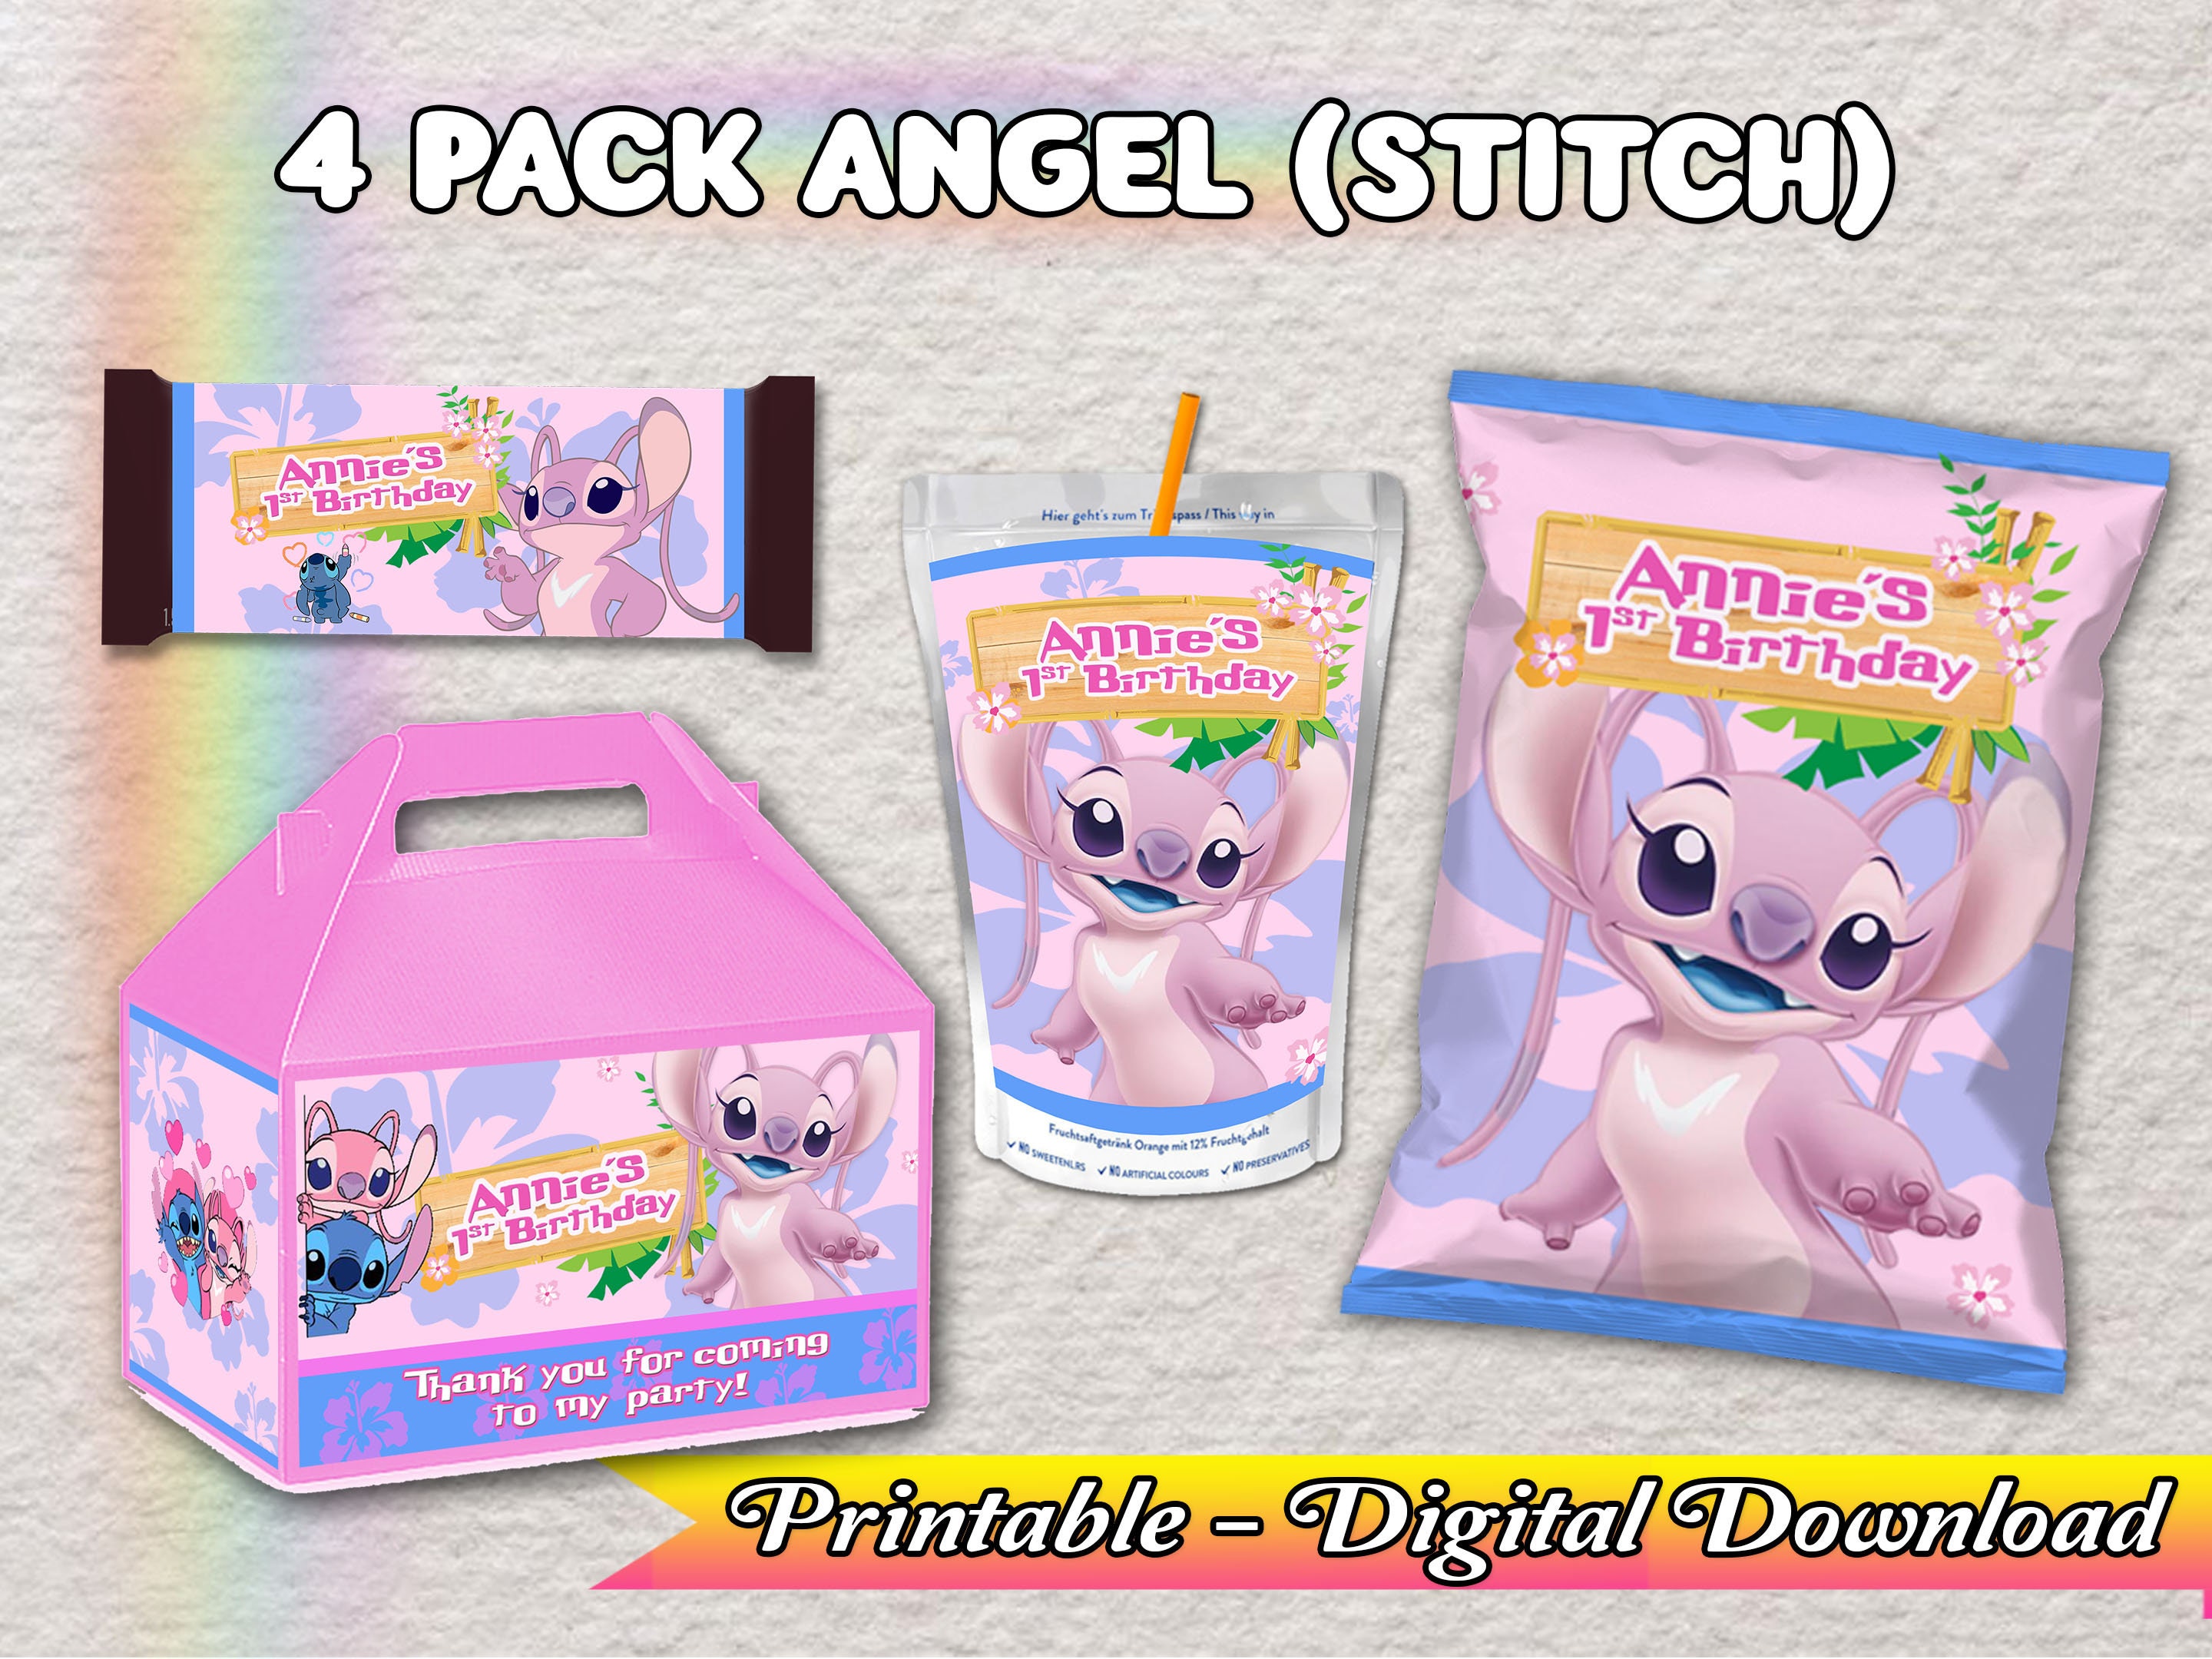 20 PCS Non-Woven Bags Mini Pink Stitch Gift Tote Bags Reusable Goodie Treat  Candy Bags for Pink Angel Stitch Birthday Party Decoration Baby Shower